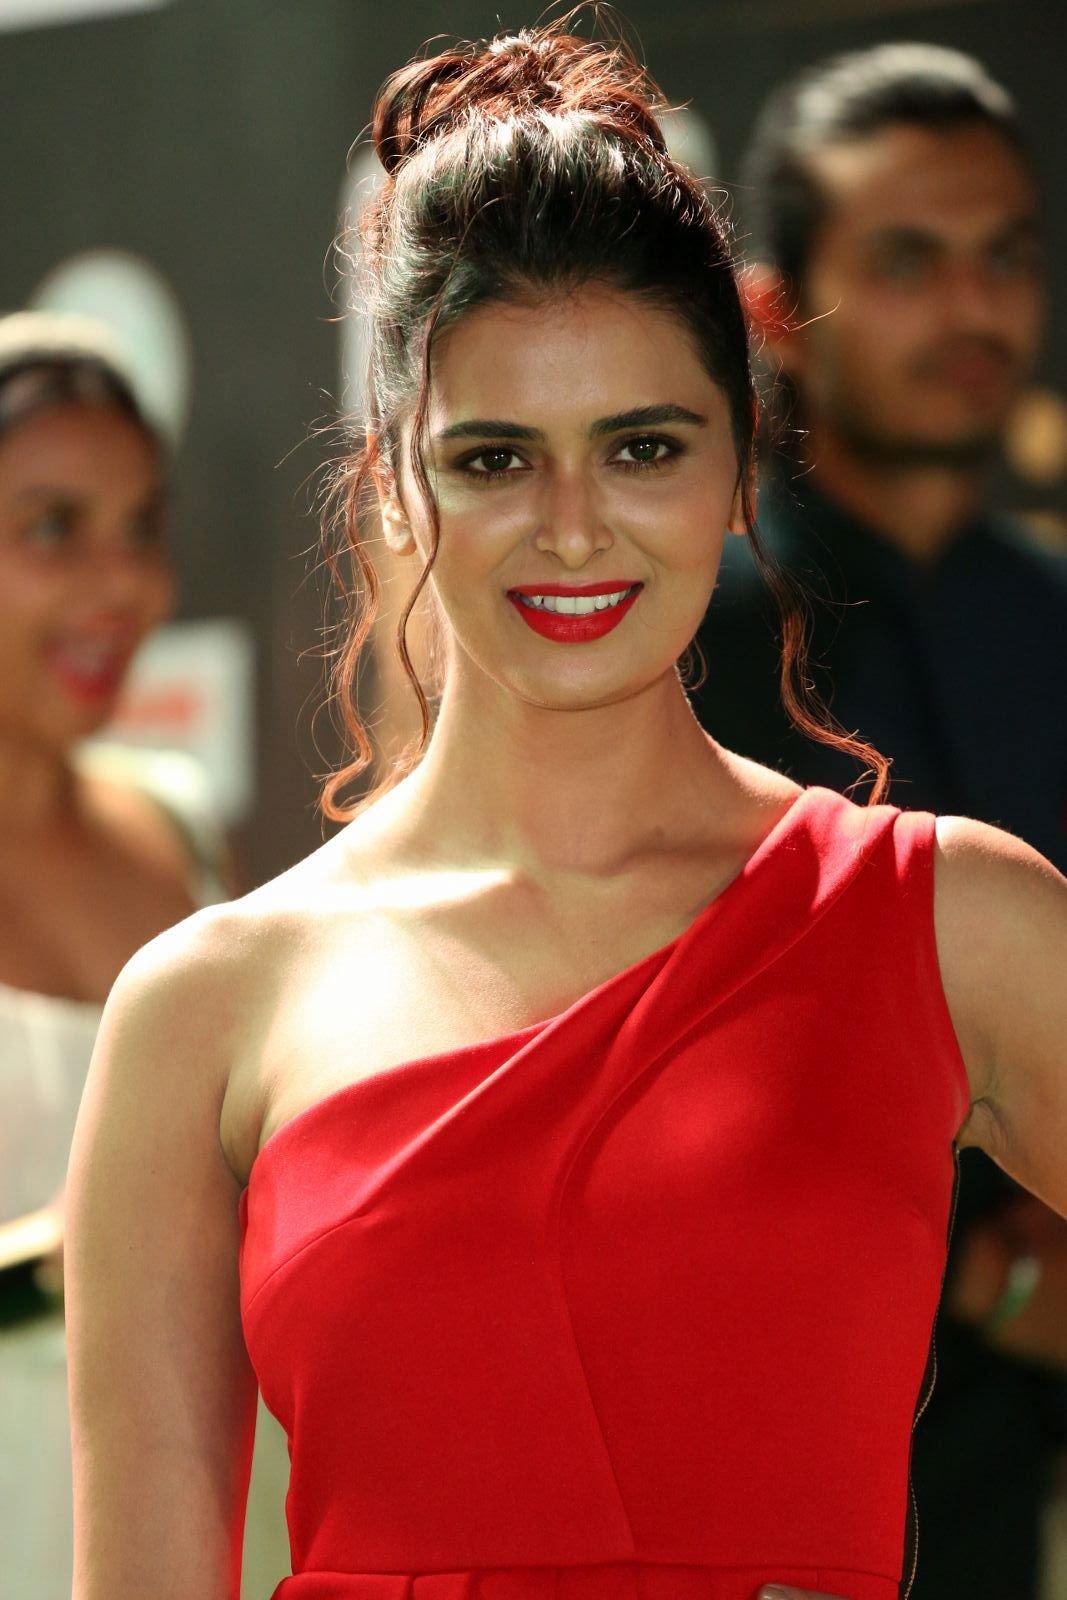 Meenakshi Dixit Showcasing Her Sexy Curves In a Red Dress At The IIFA Utsavam Awards 2017